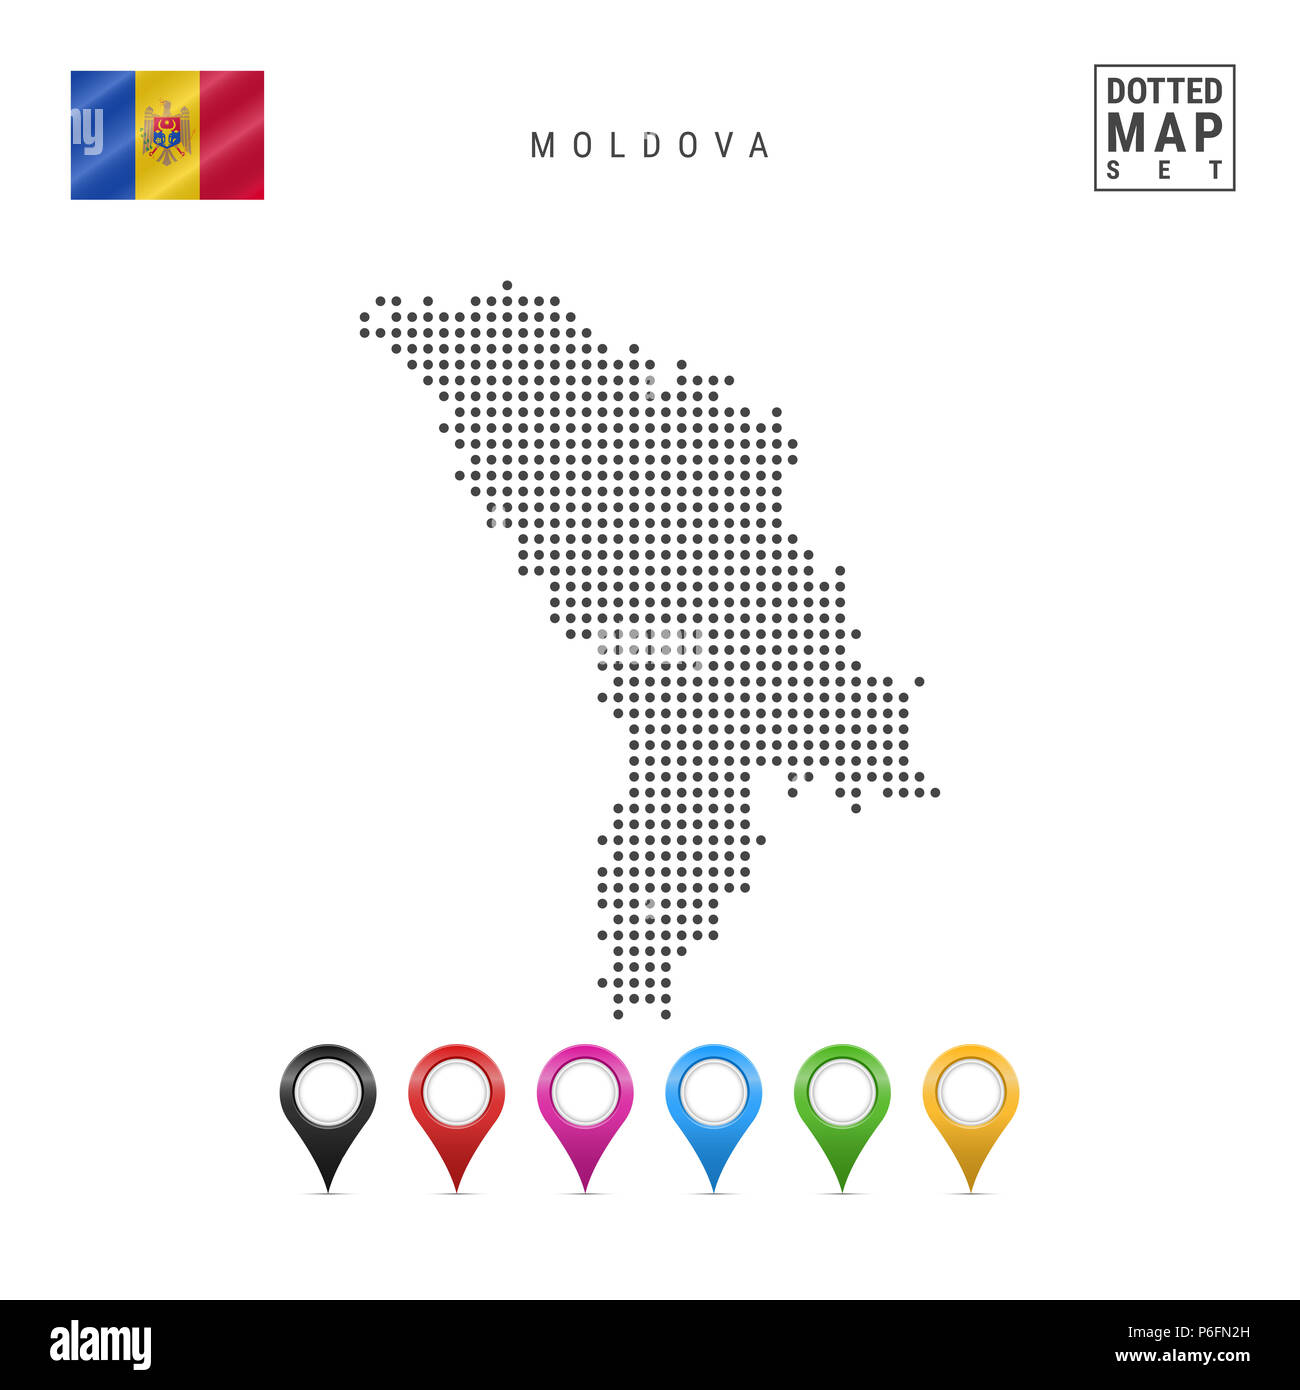 Dotted Map of Moldova. Simple Silhouette of Moldova. The National Flag of Moldova. Set of Multicolored Map Markers. Illustration Isolated on White Bac Stock Photo